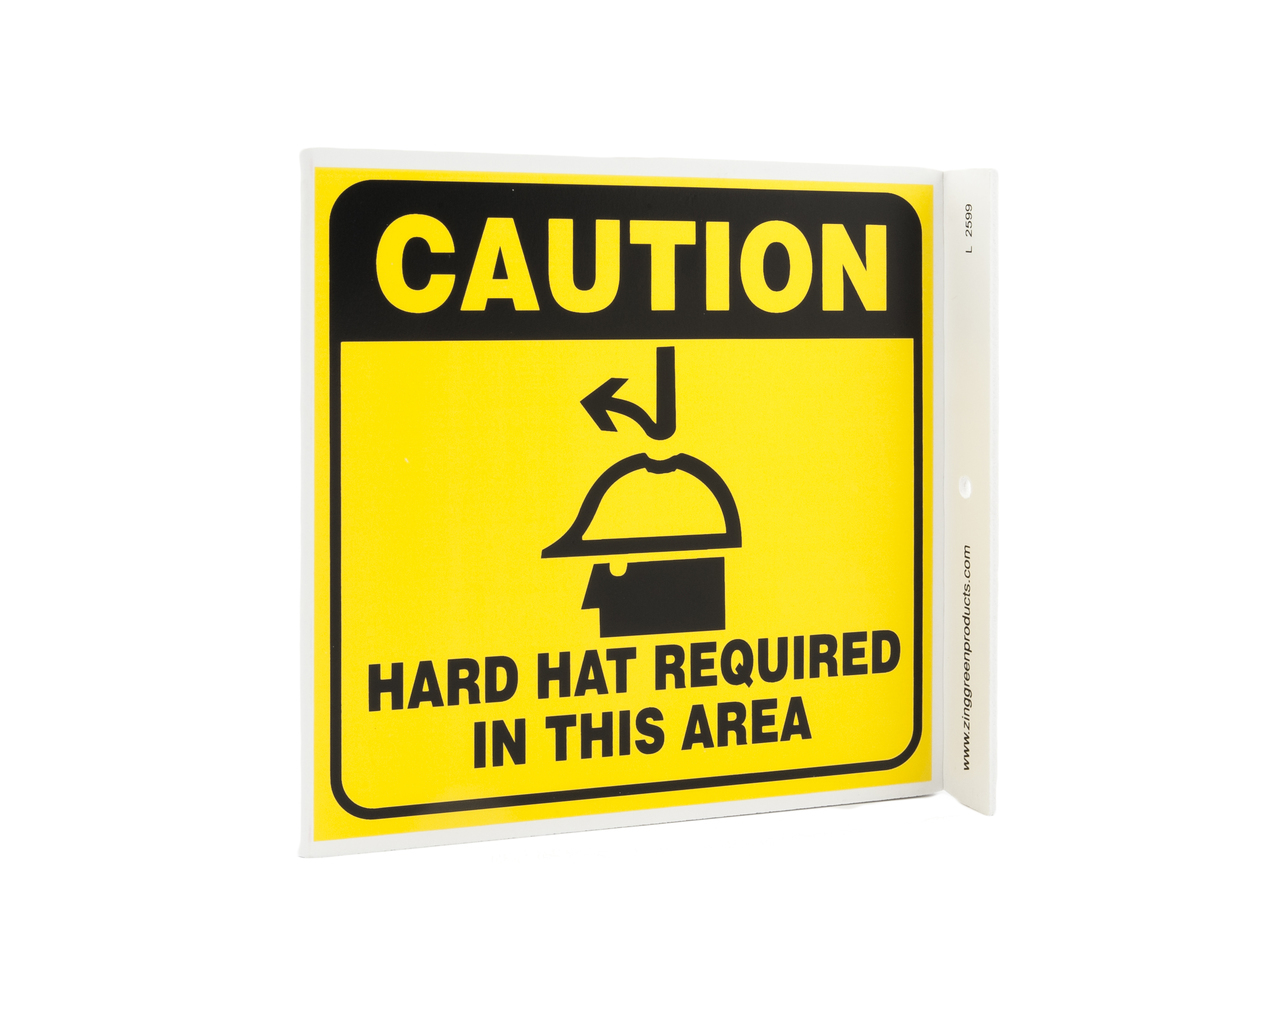 ZING Eco Safety L Sign, Caution Hardhat Area, 7Hx2.5Wx7D, Recycled Plastic